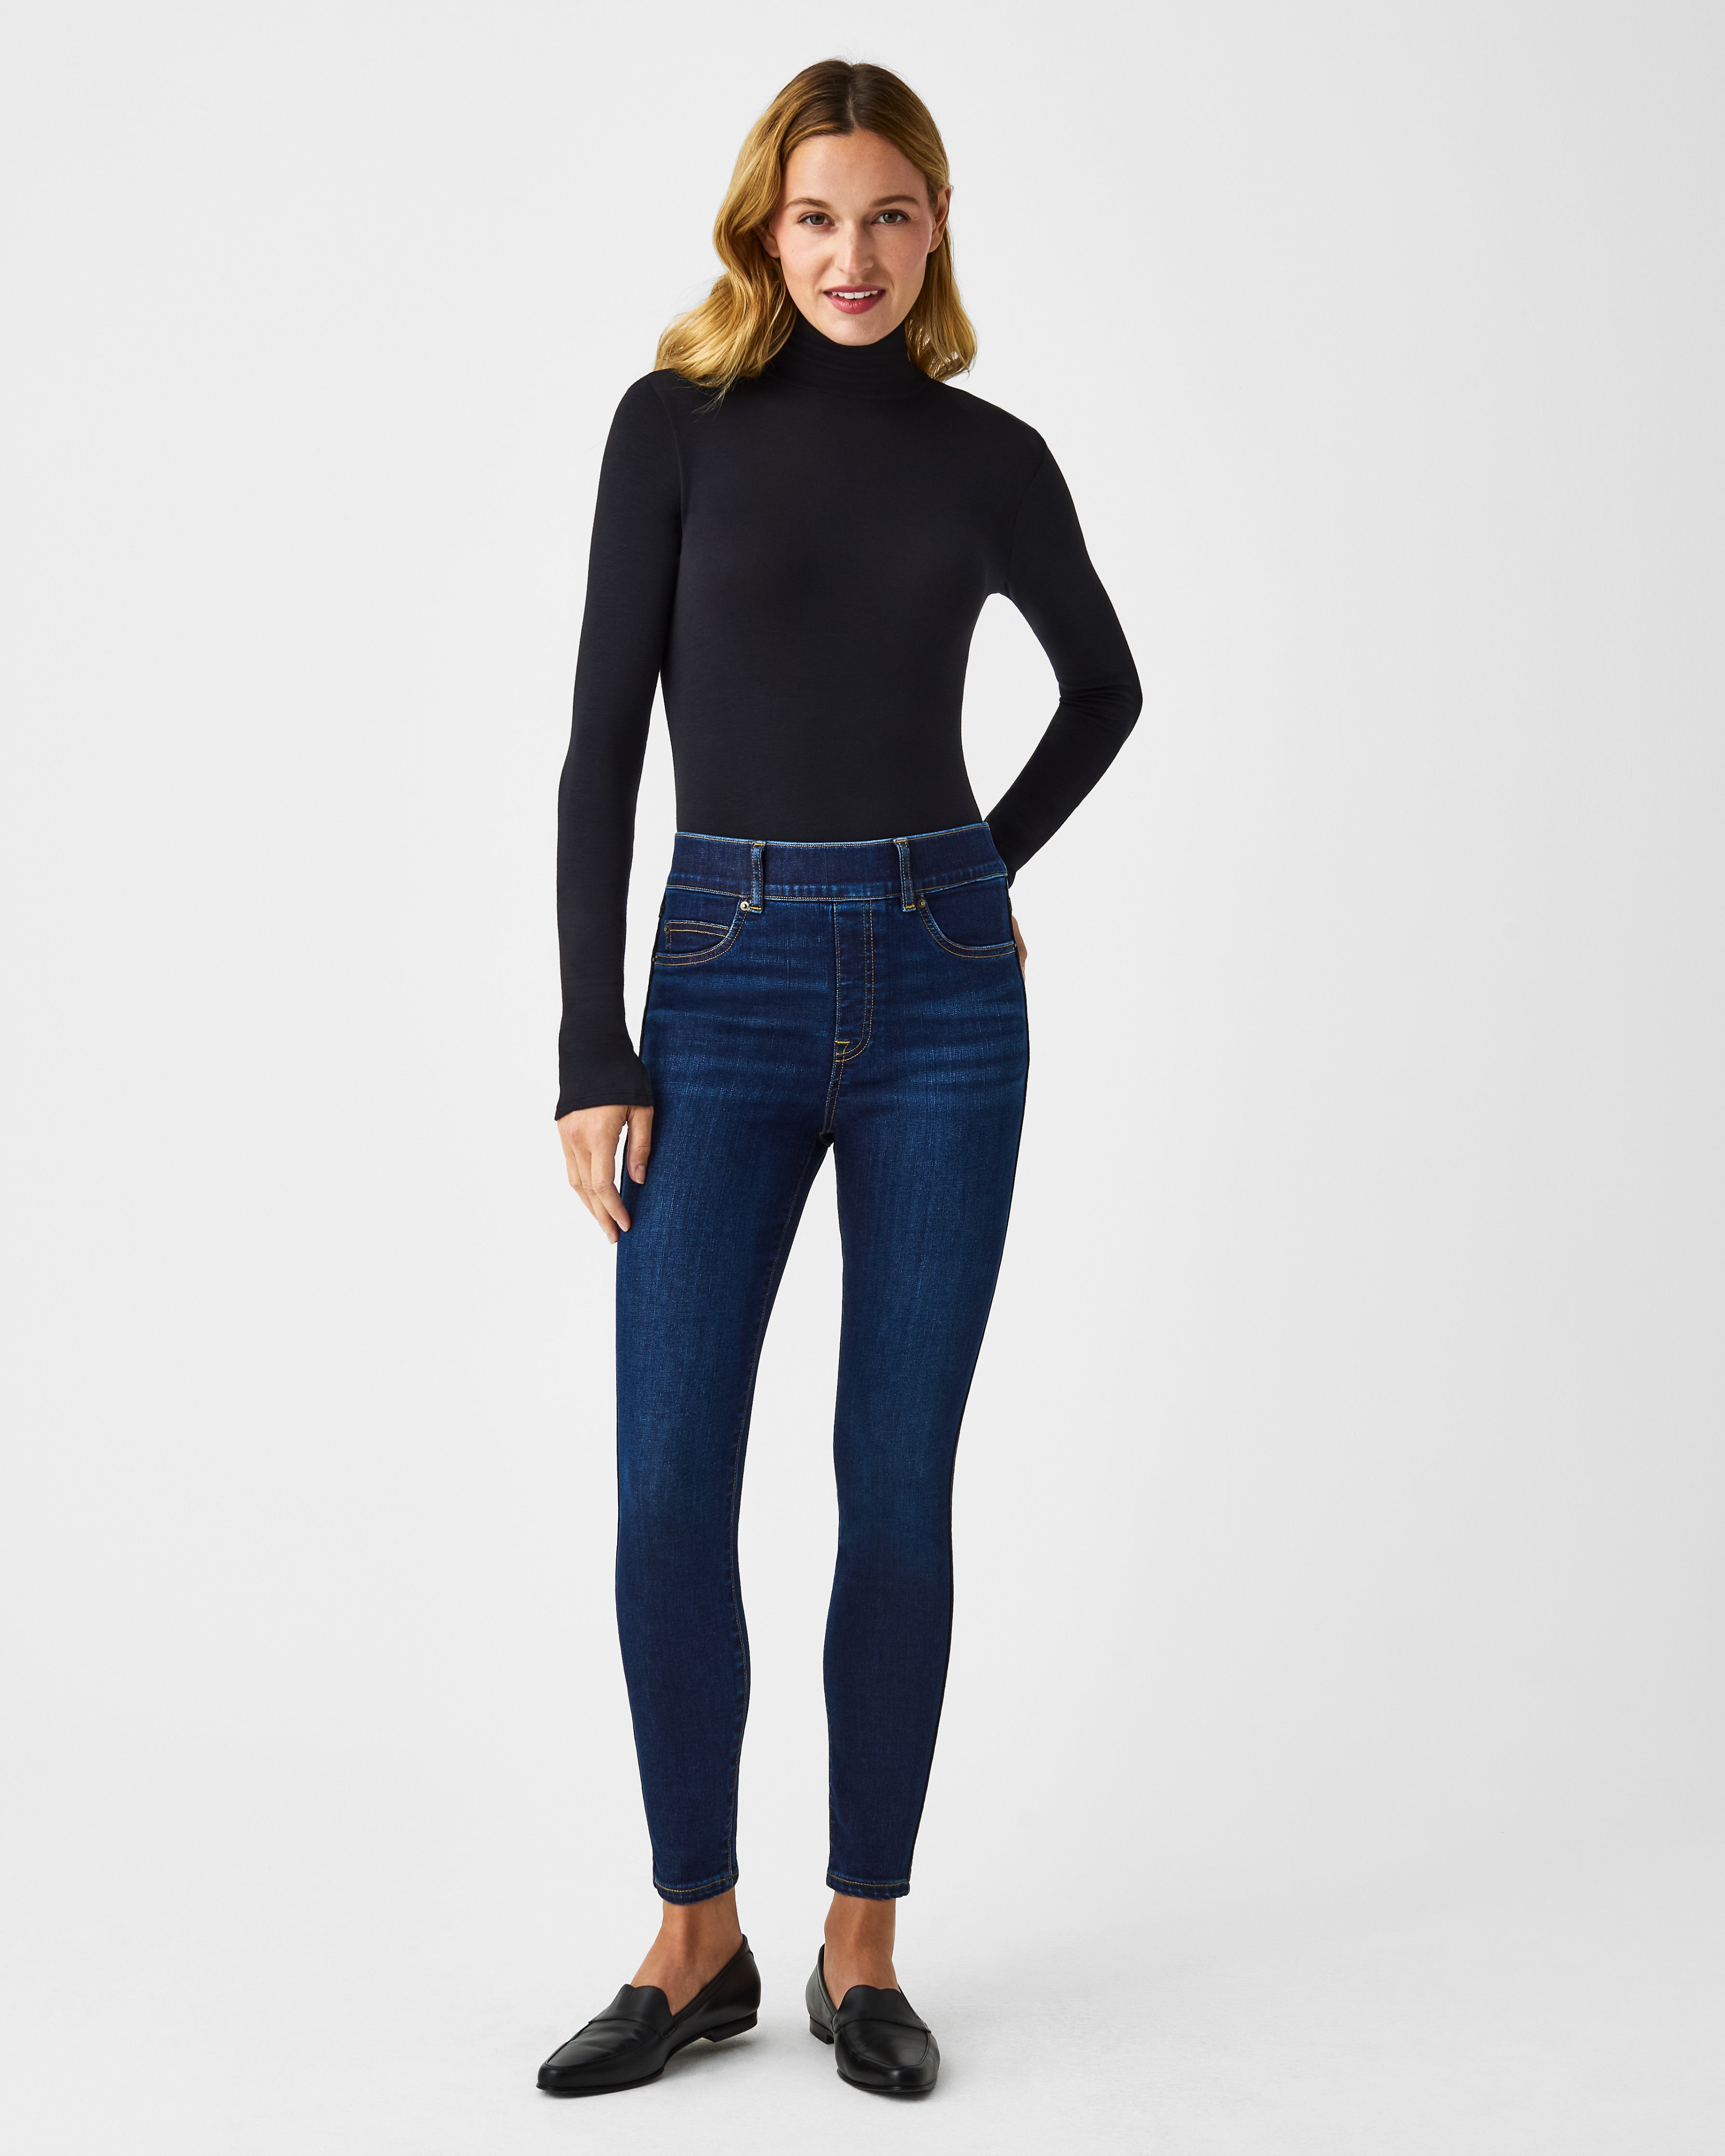 Tailored crepe ankle pant, Contemporaine, Shop Women%u2019s Skinny Pants  Online in Canada